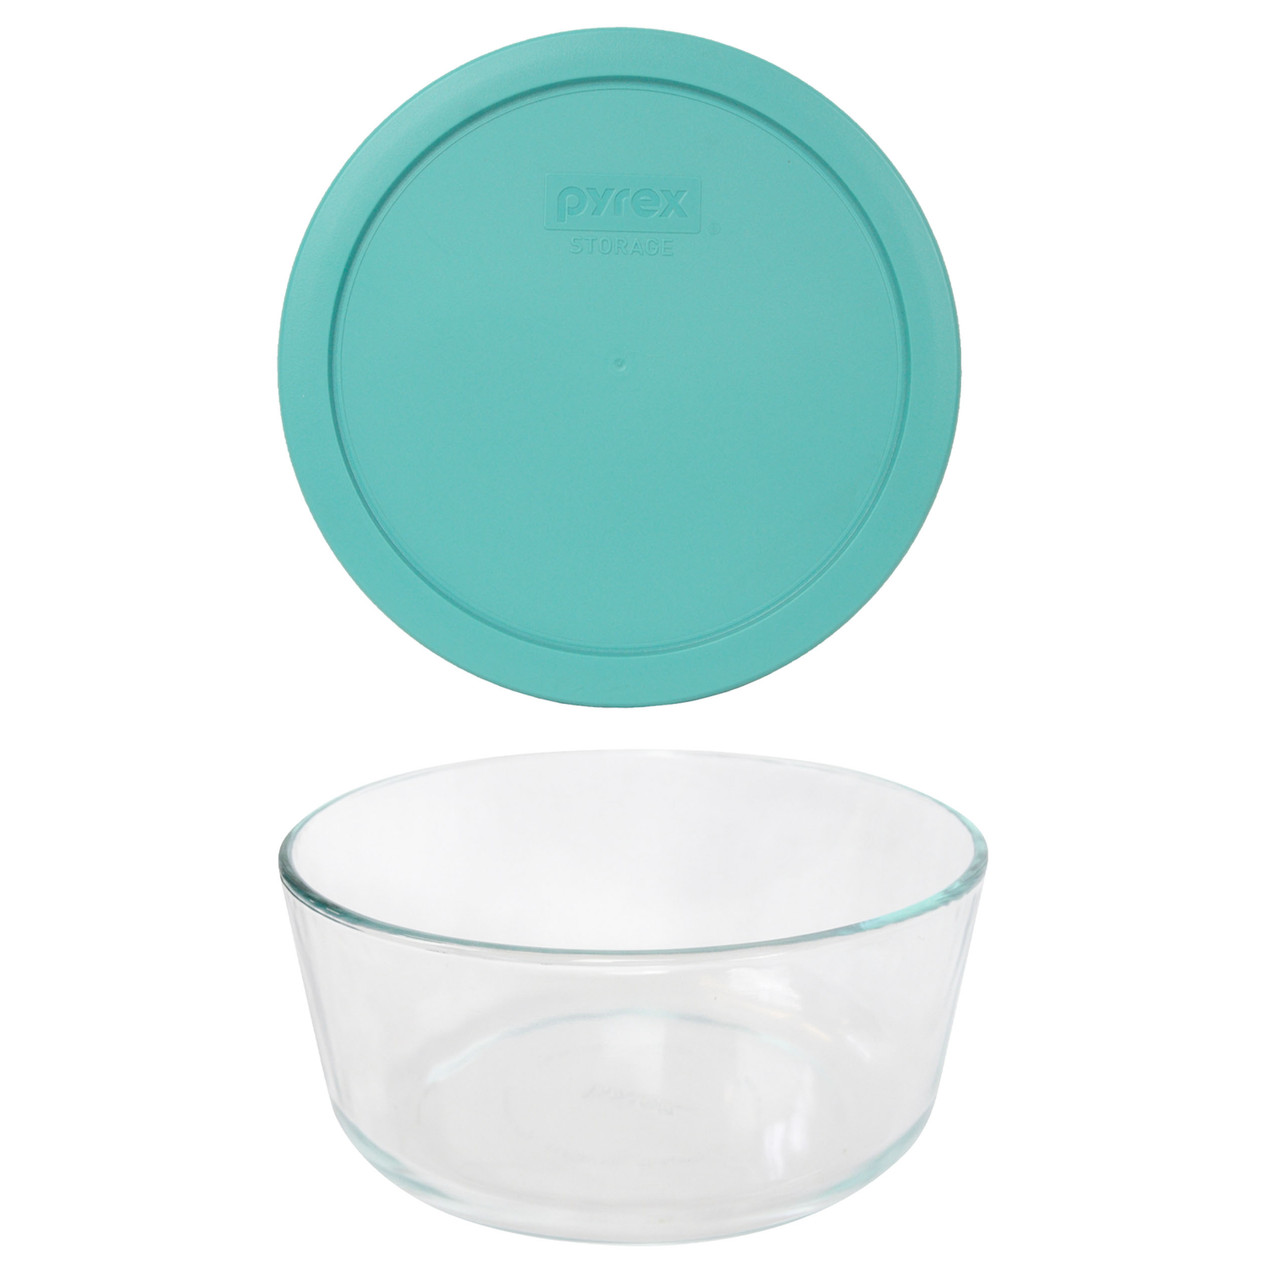 Pyrex 7203 7-Cup Glass Food Storage Bowls w/ 7402-PC 7-Cup Turquoise Lid Covers